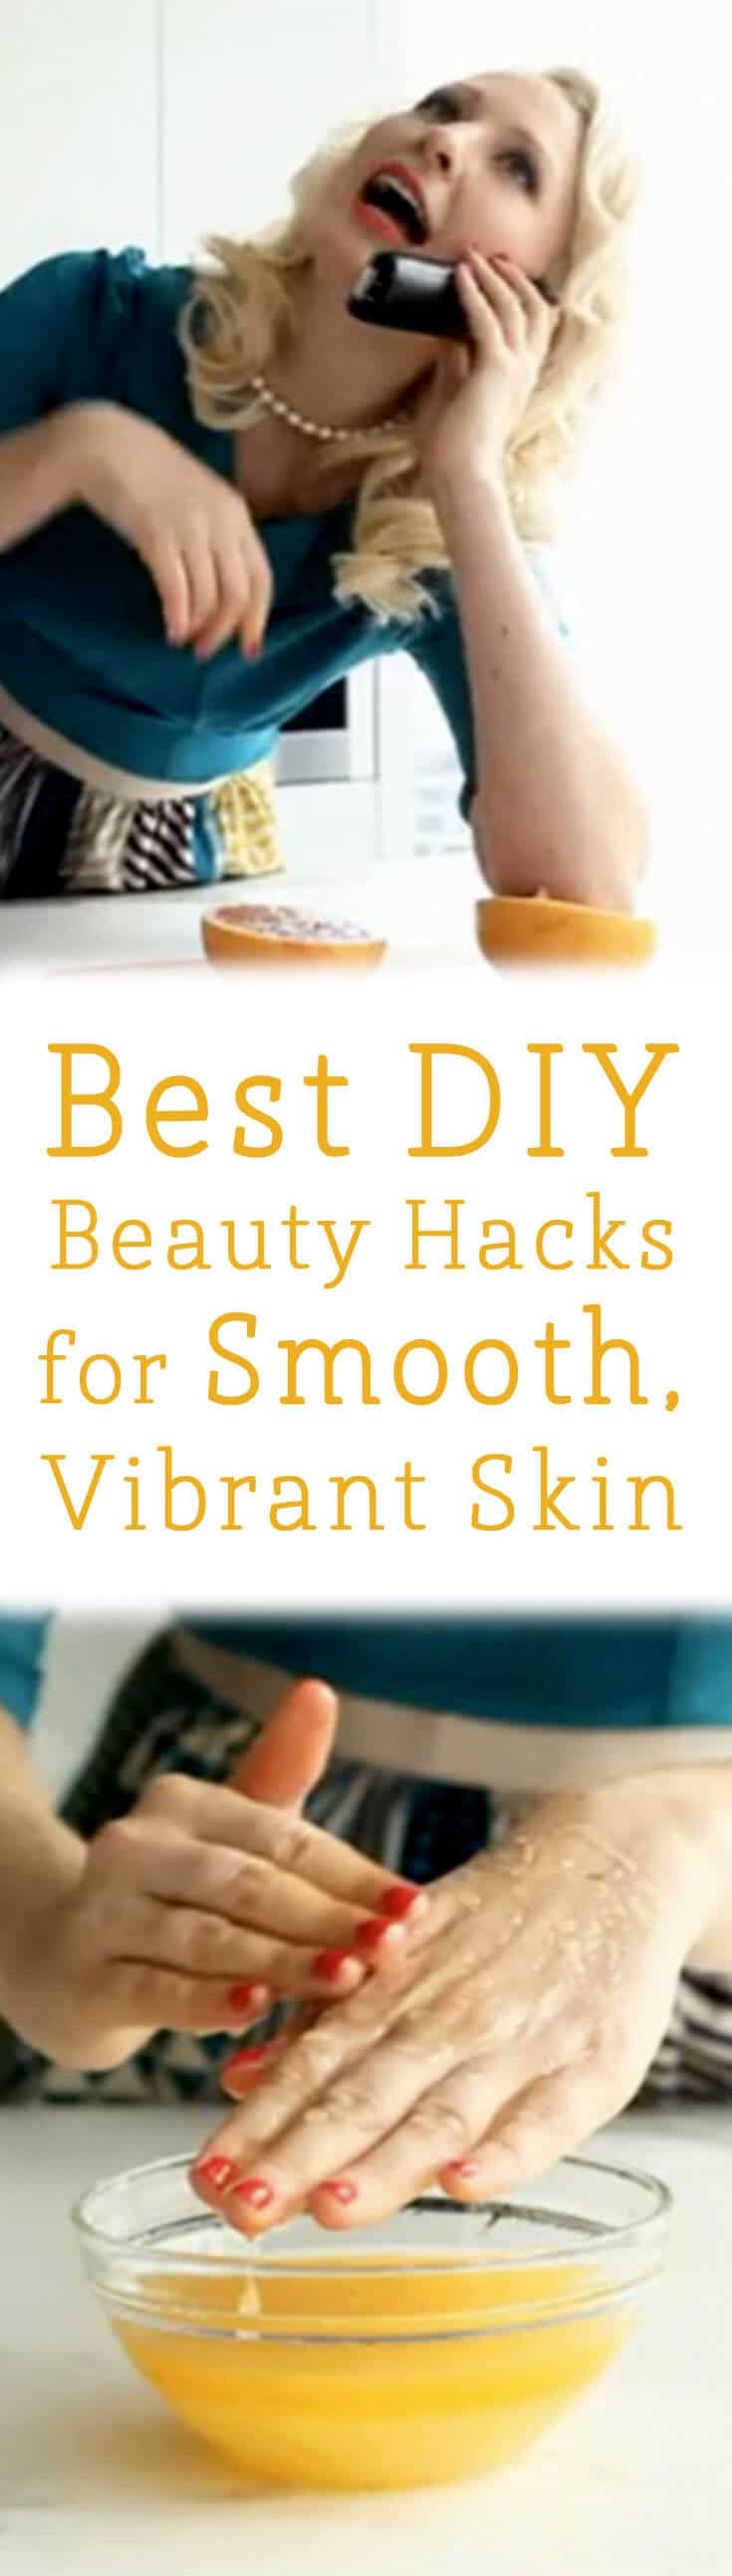 Freshen up your dull skin with these DIY beauty tips!